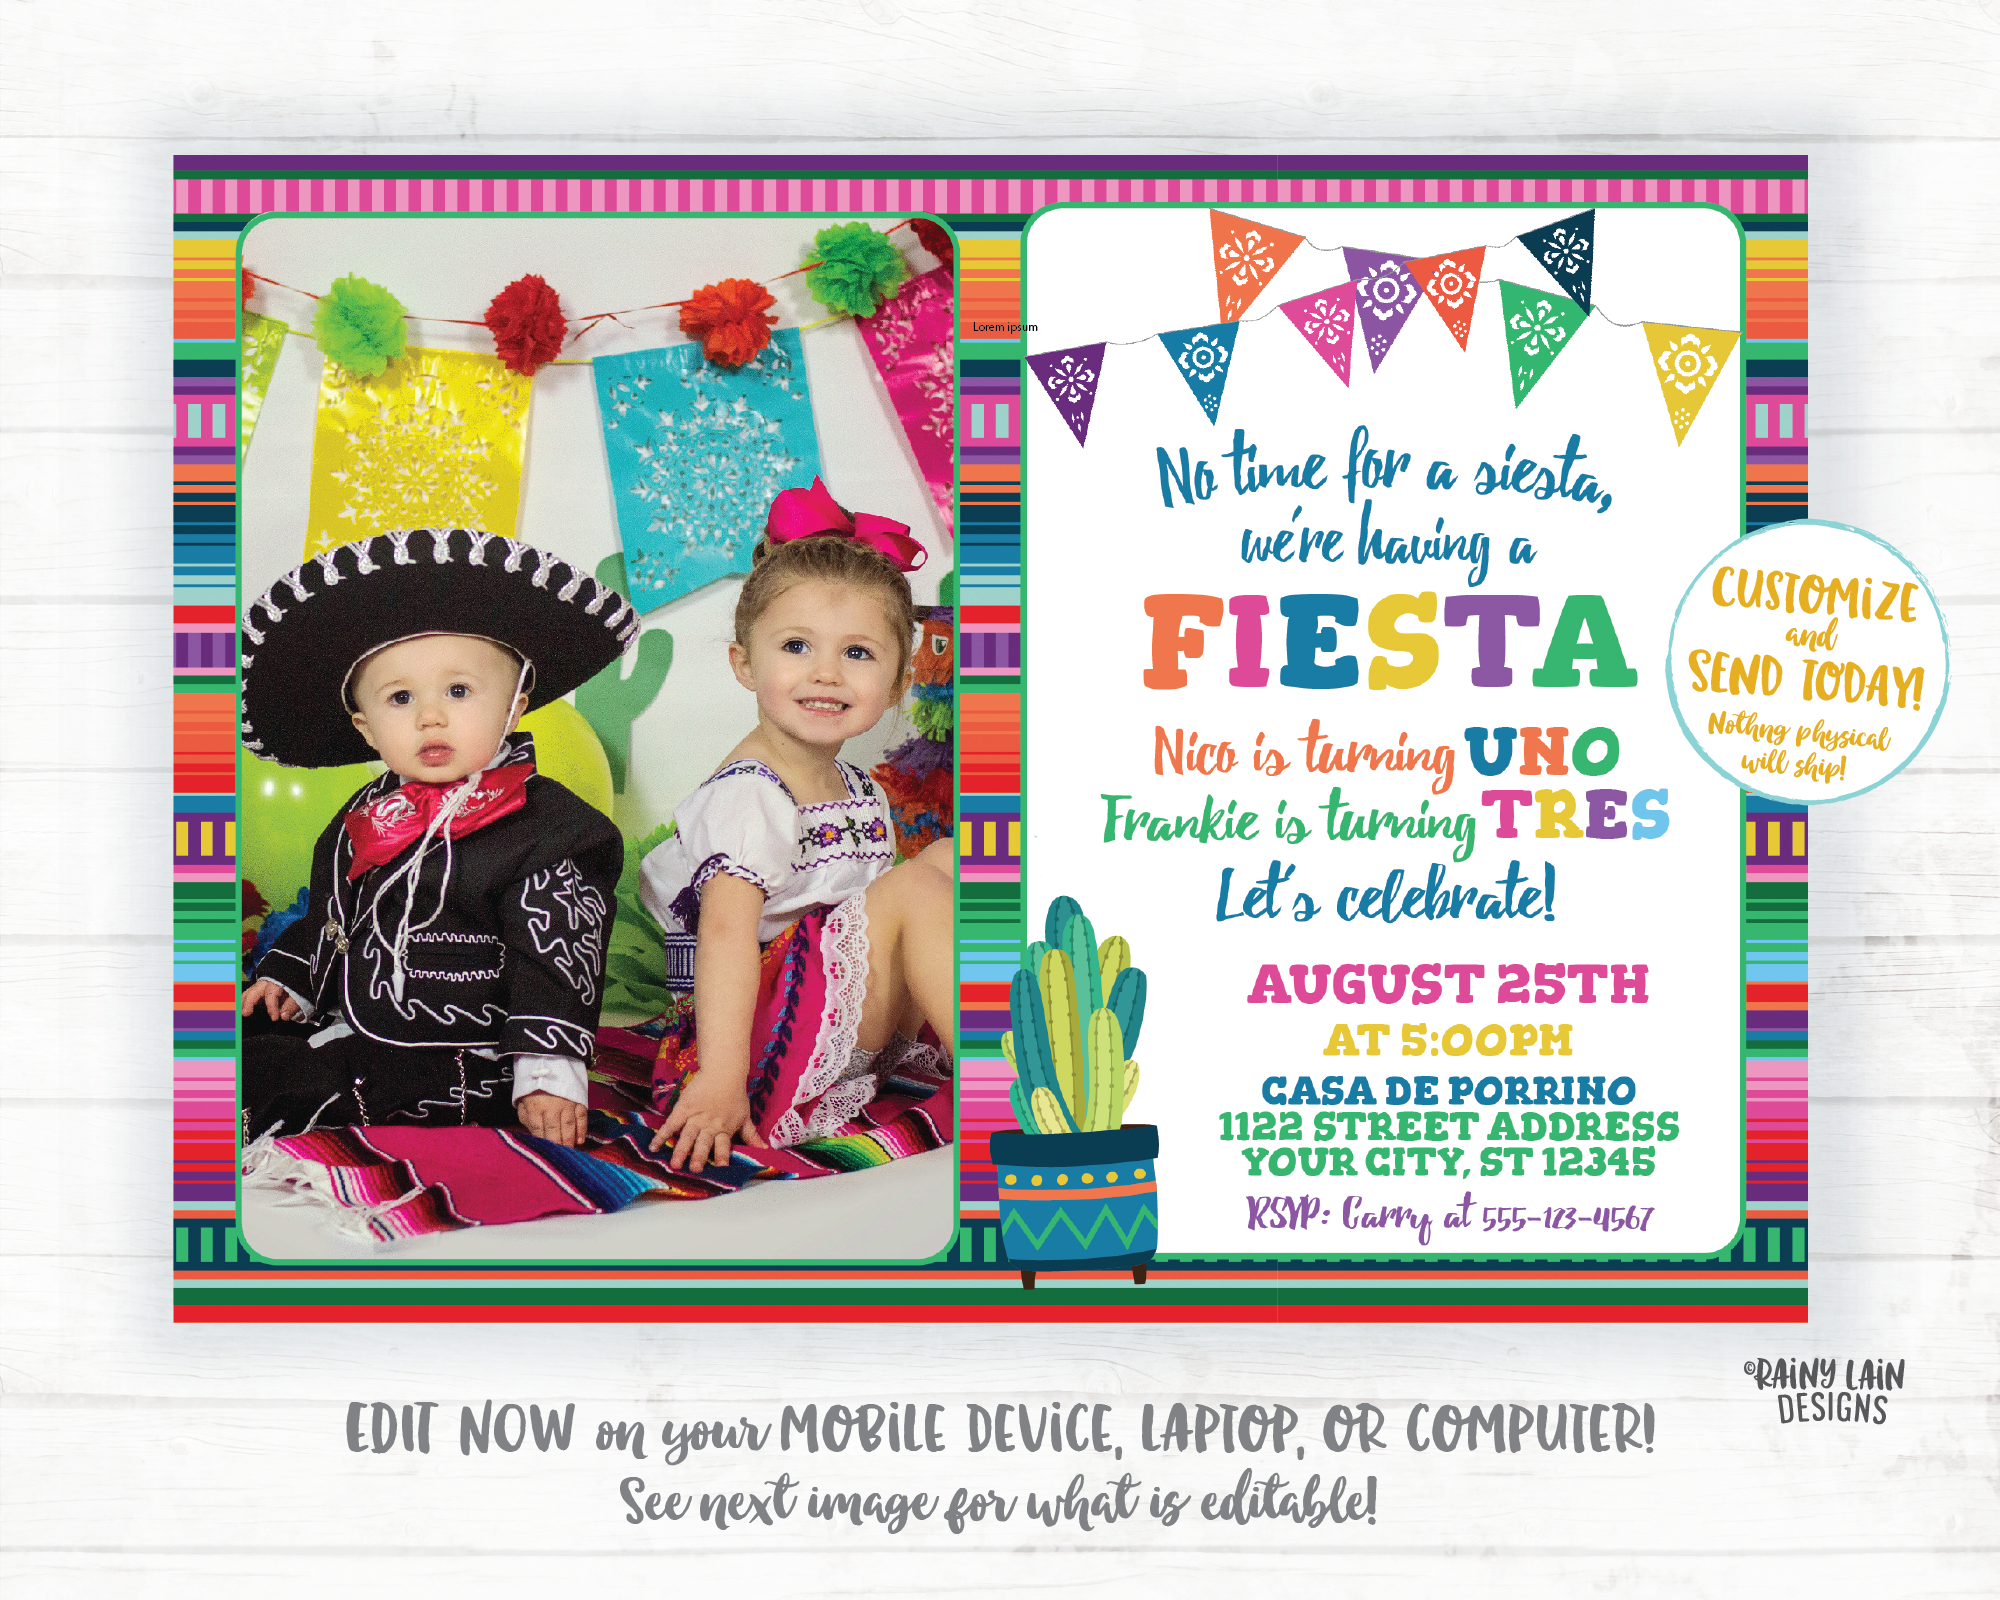 Colorful Mexican Fiesta Themed Party Ideas  Download Hundreds FREE  PRINTABLE Birthday Invitation Templates